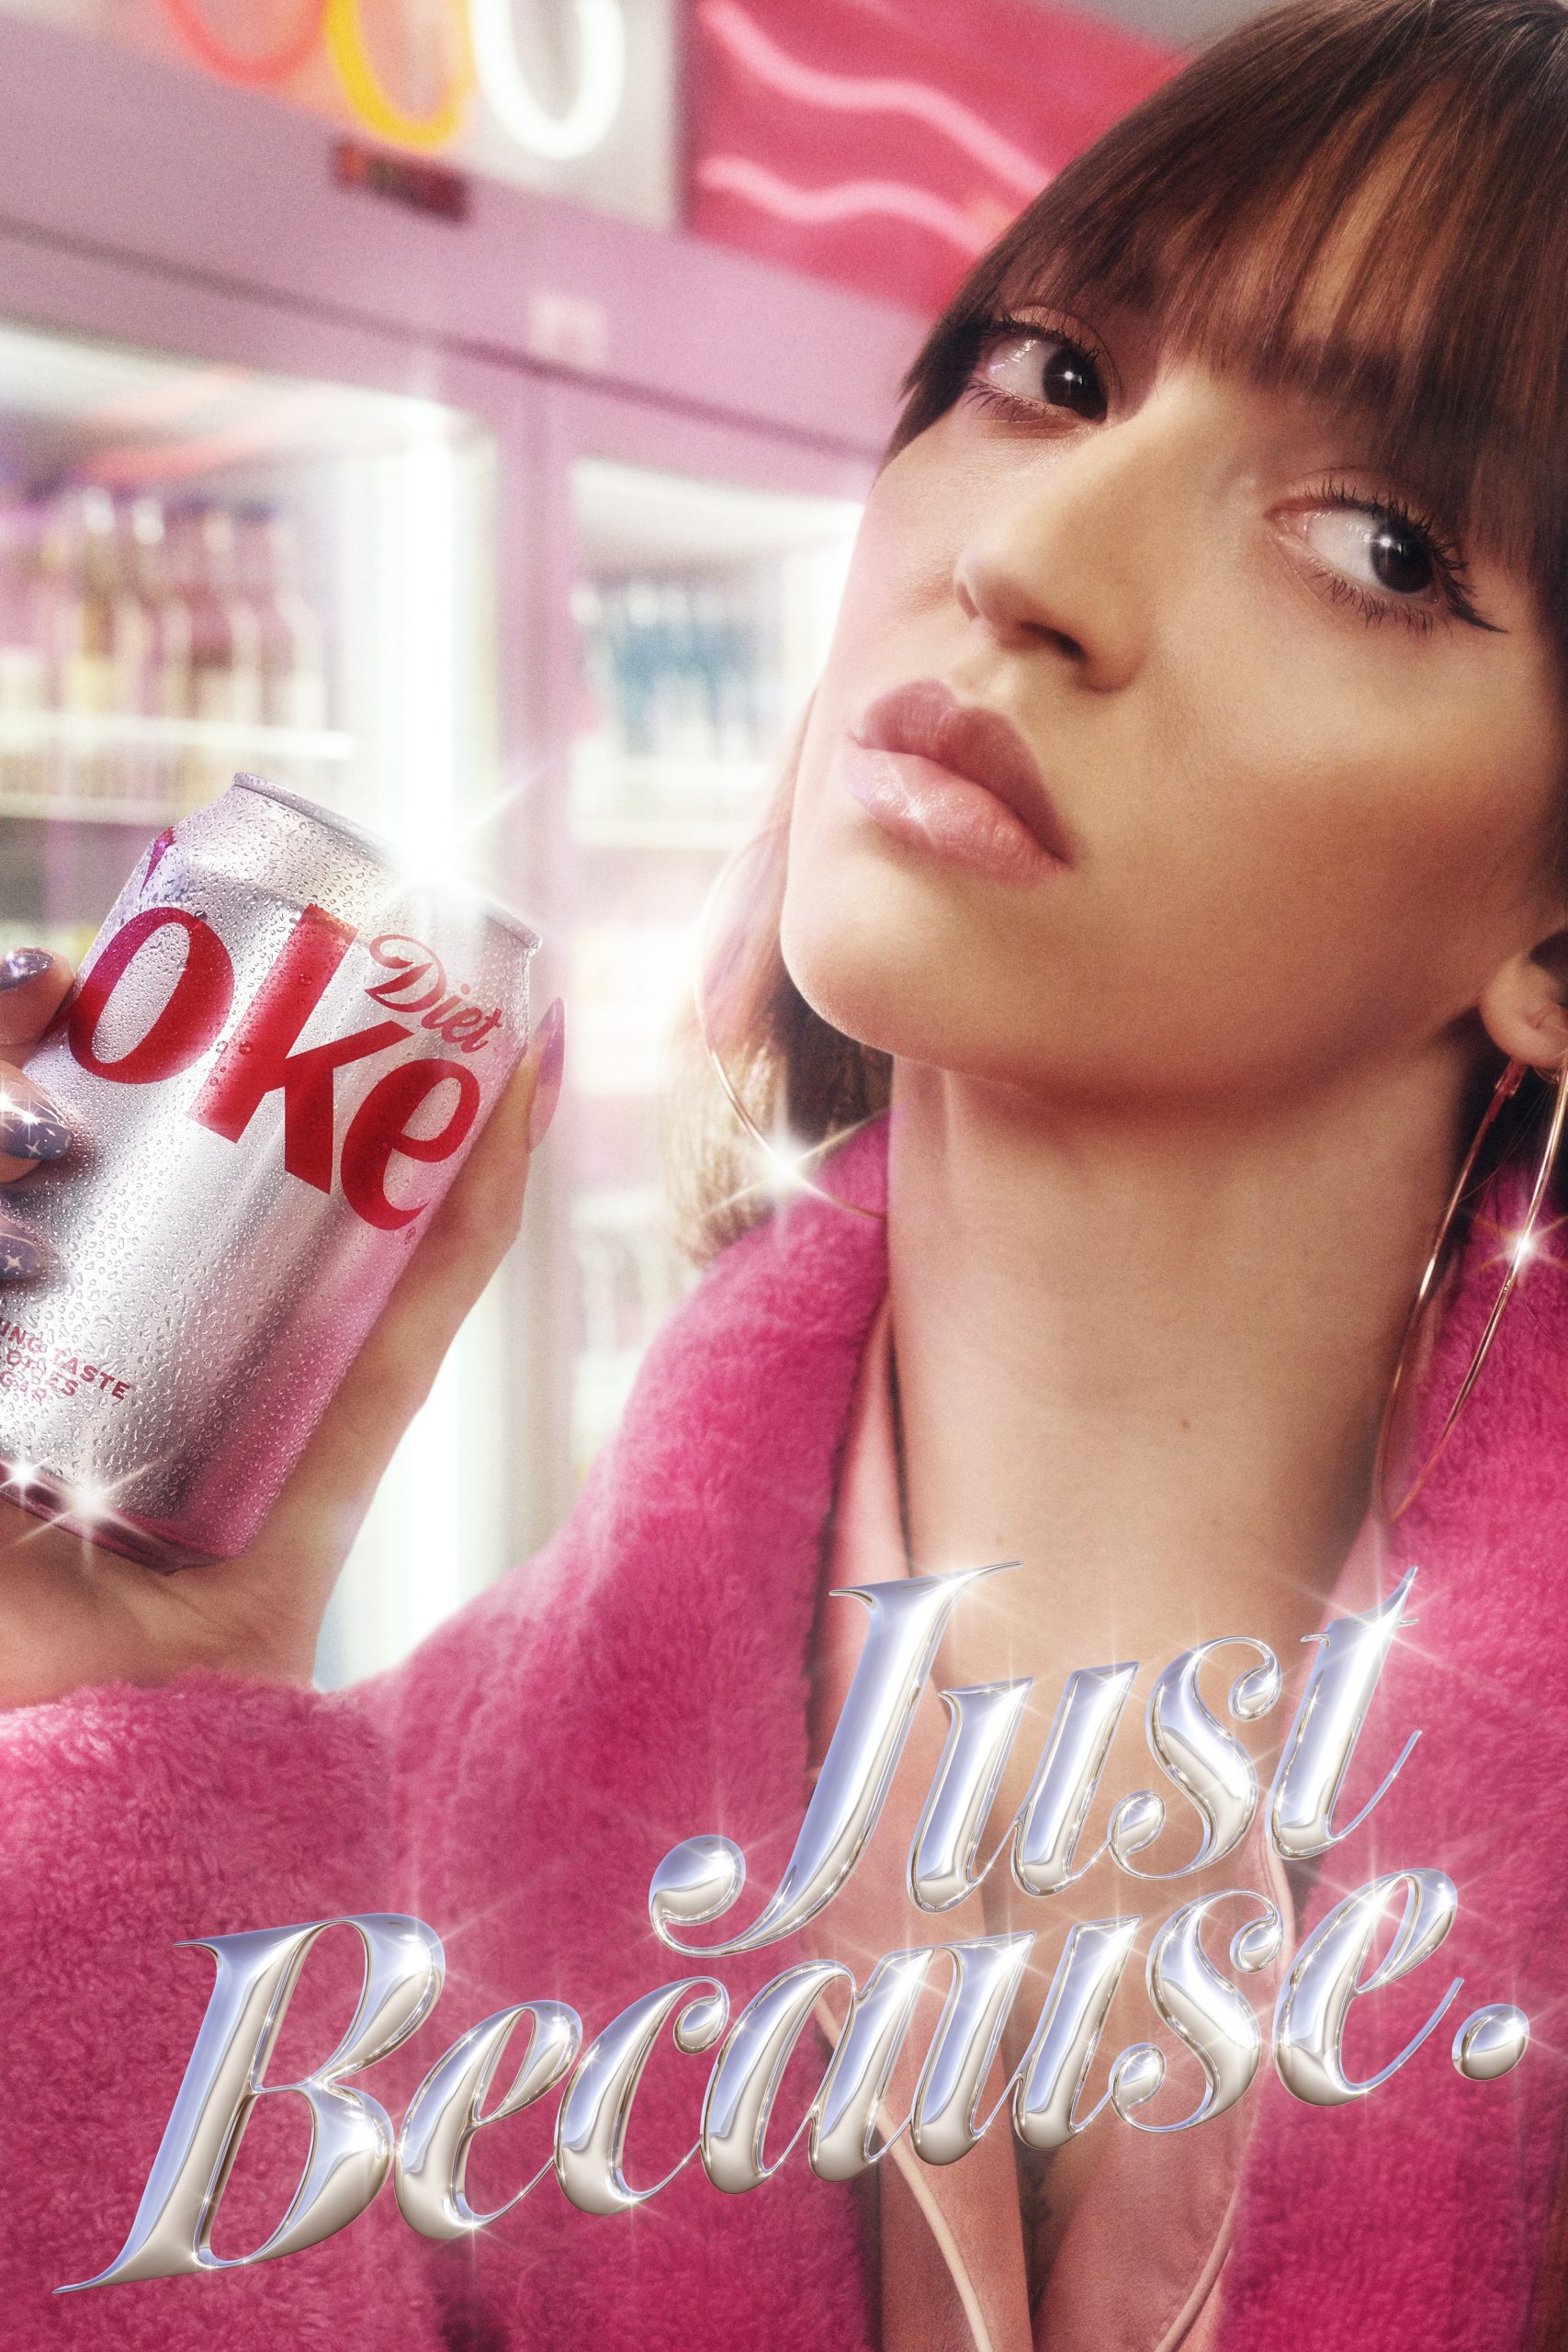 Diet Coke launches new light-hearted ad campaign, ‘Just Because’